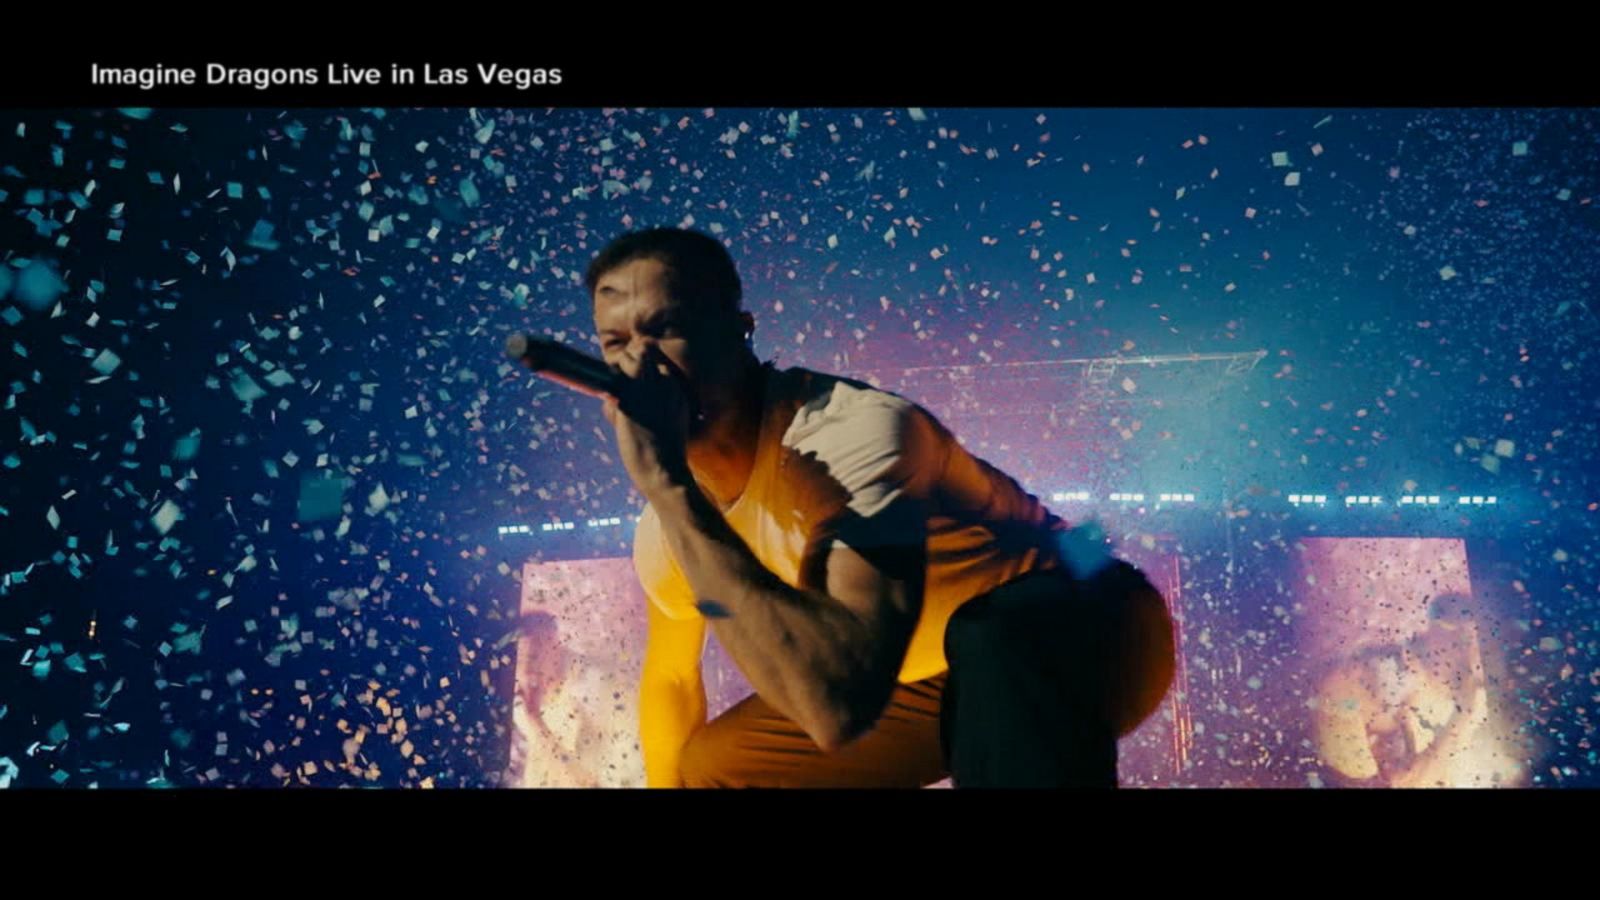 VIDEO: Imagine Dragons band is focus of new documentary